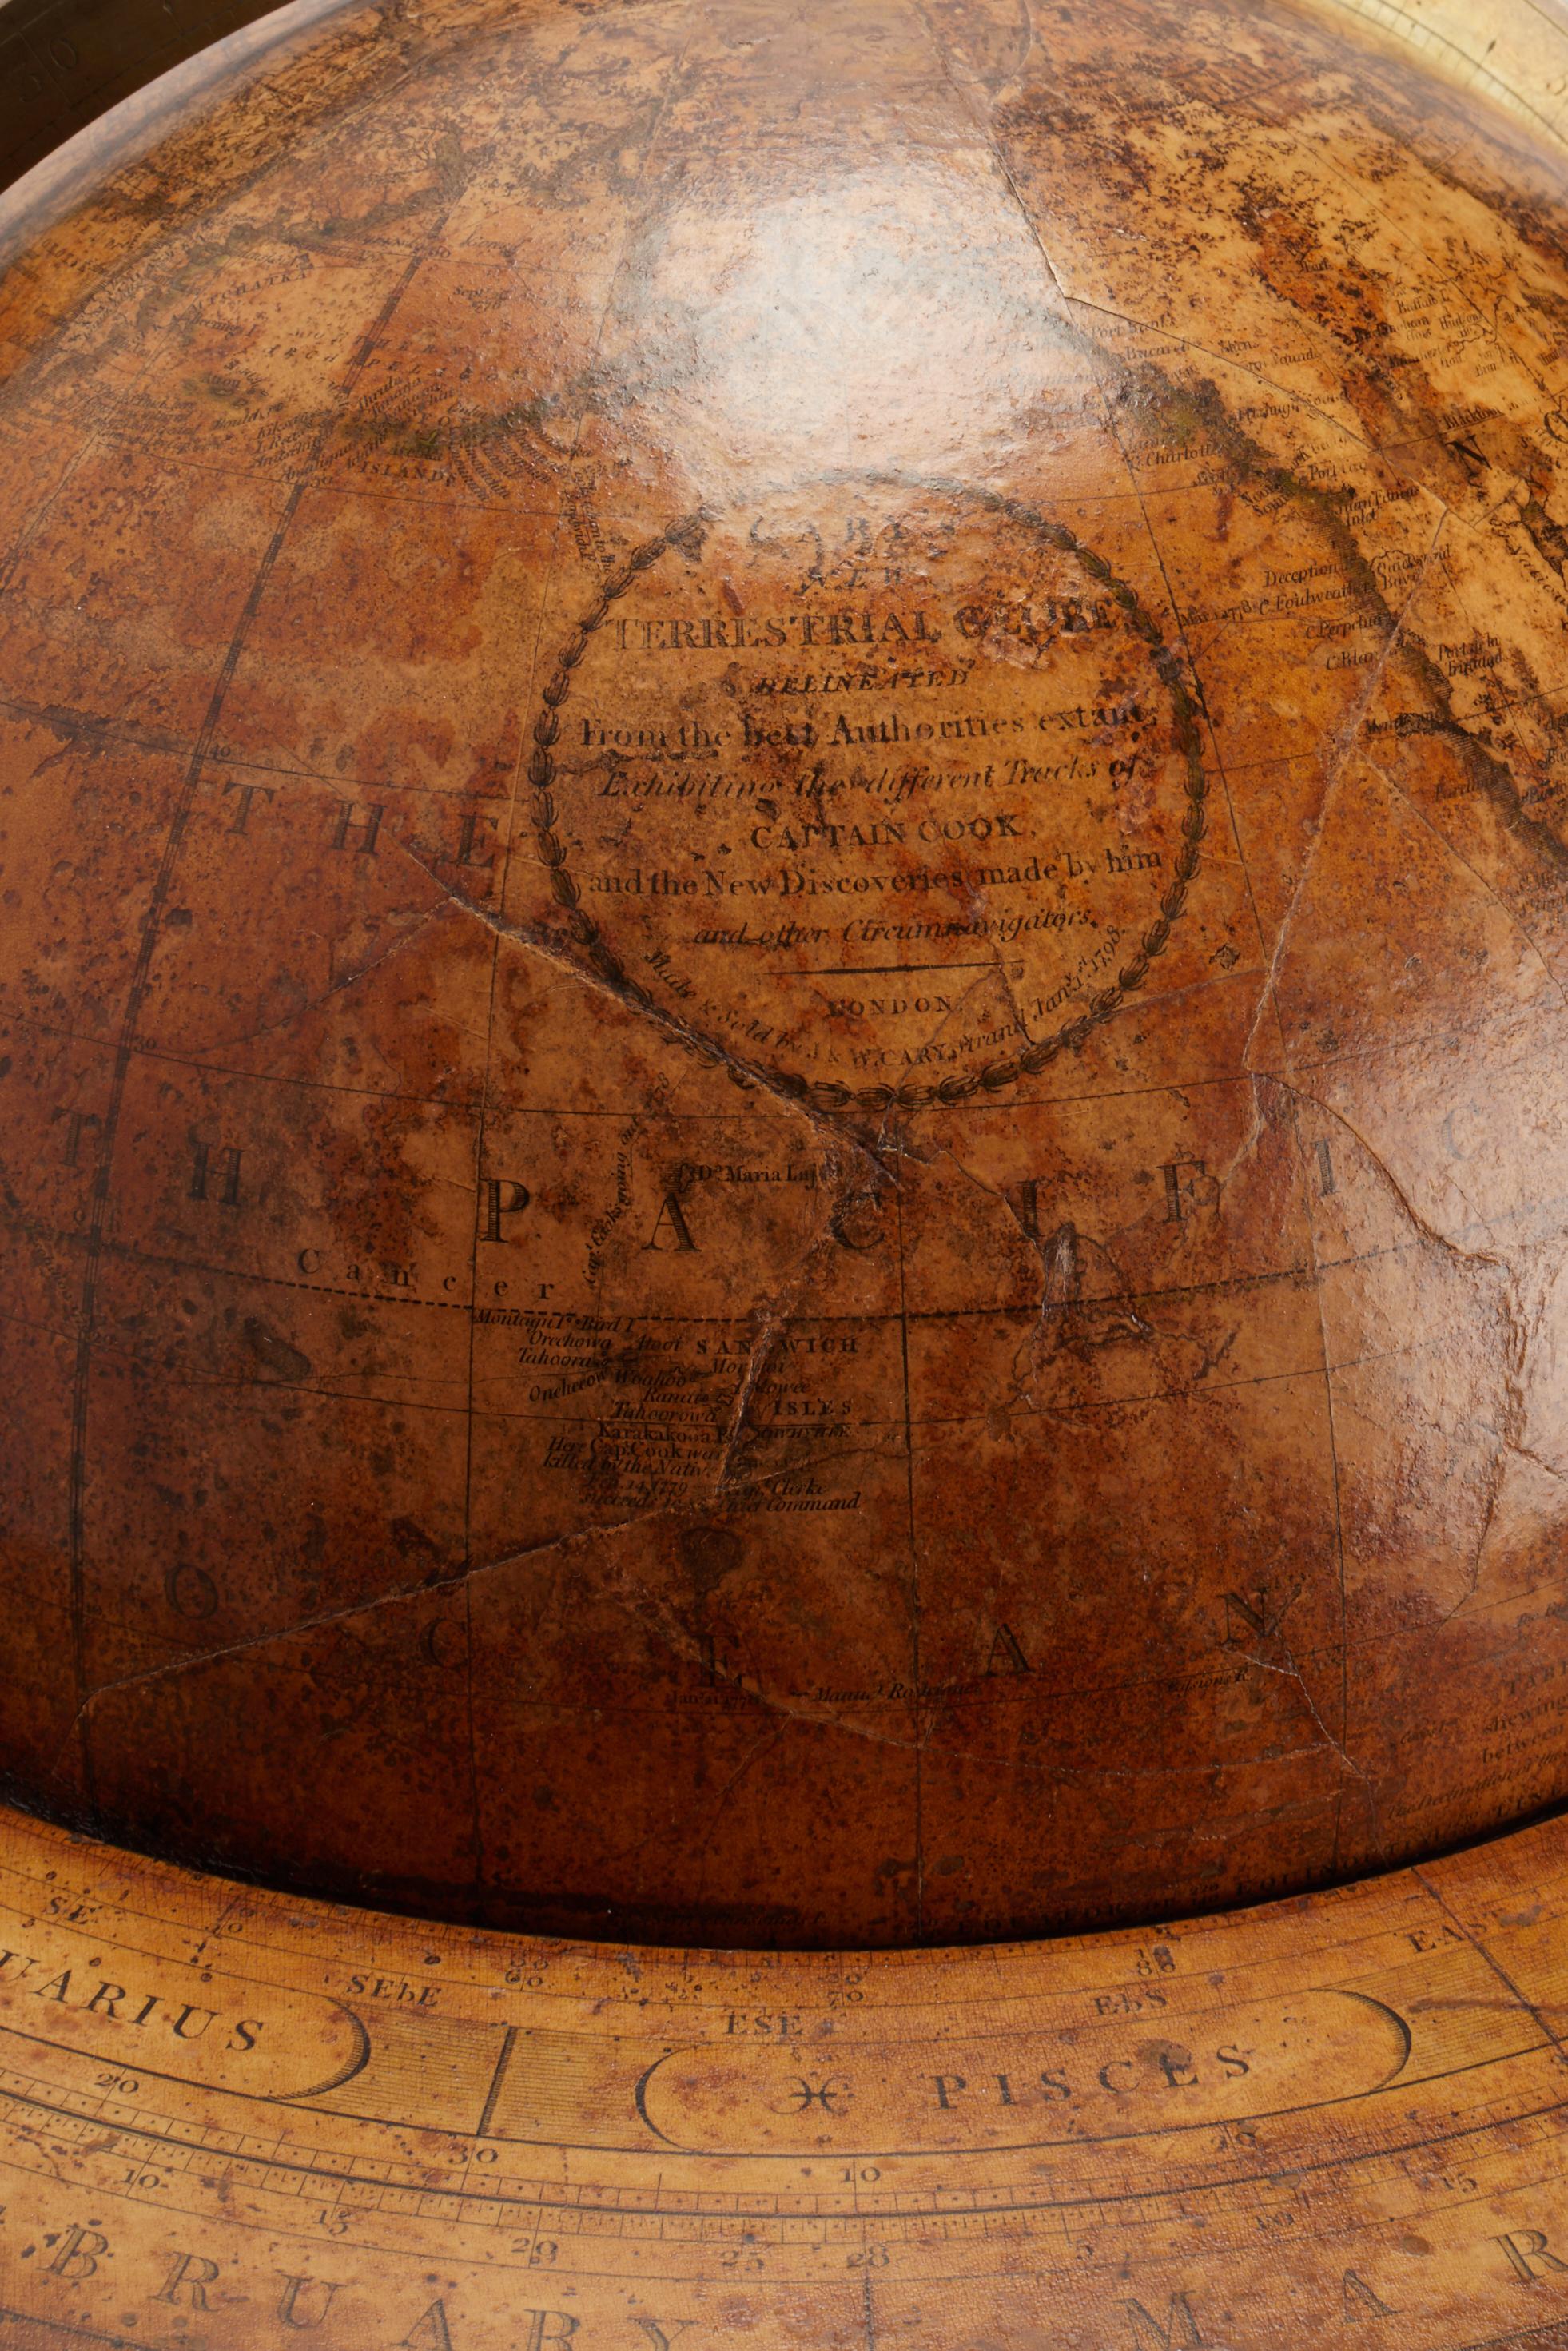 Large 'Papier Machè' terrestrial globe with gores printed in calcography a color finished, on a wooden tripod. One compass joints the three feet. Brass meridian. Maker CARY, London, England, circa 1798.